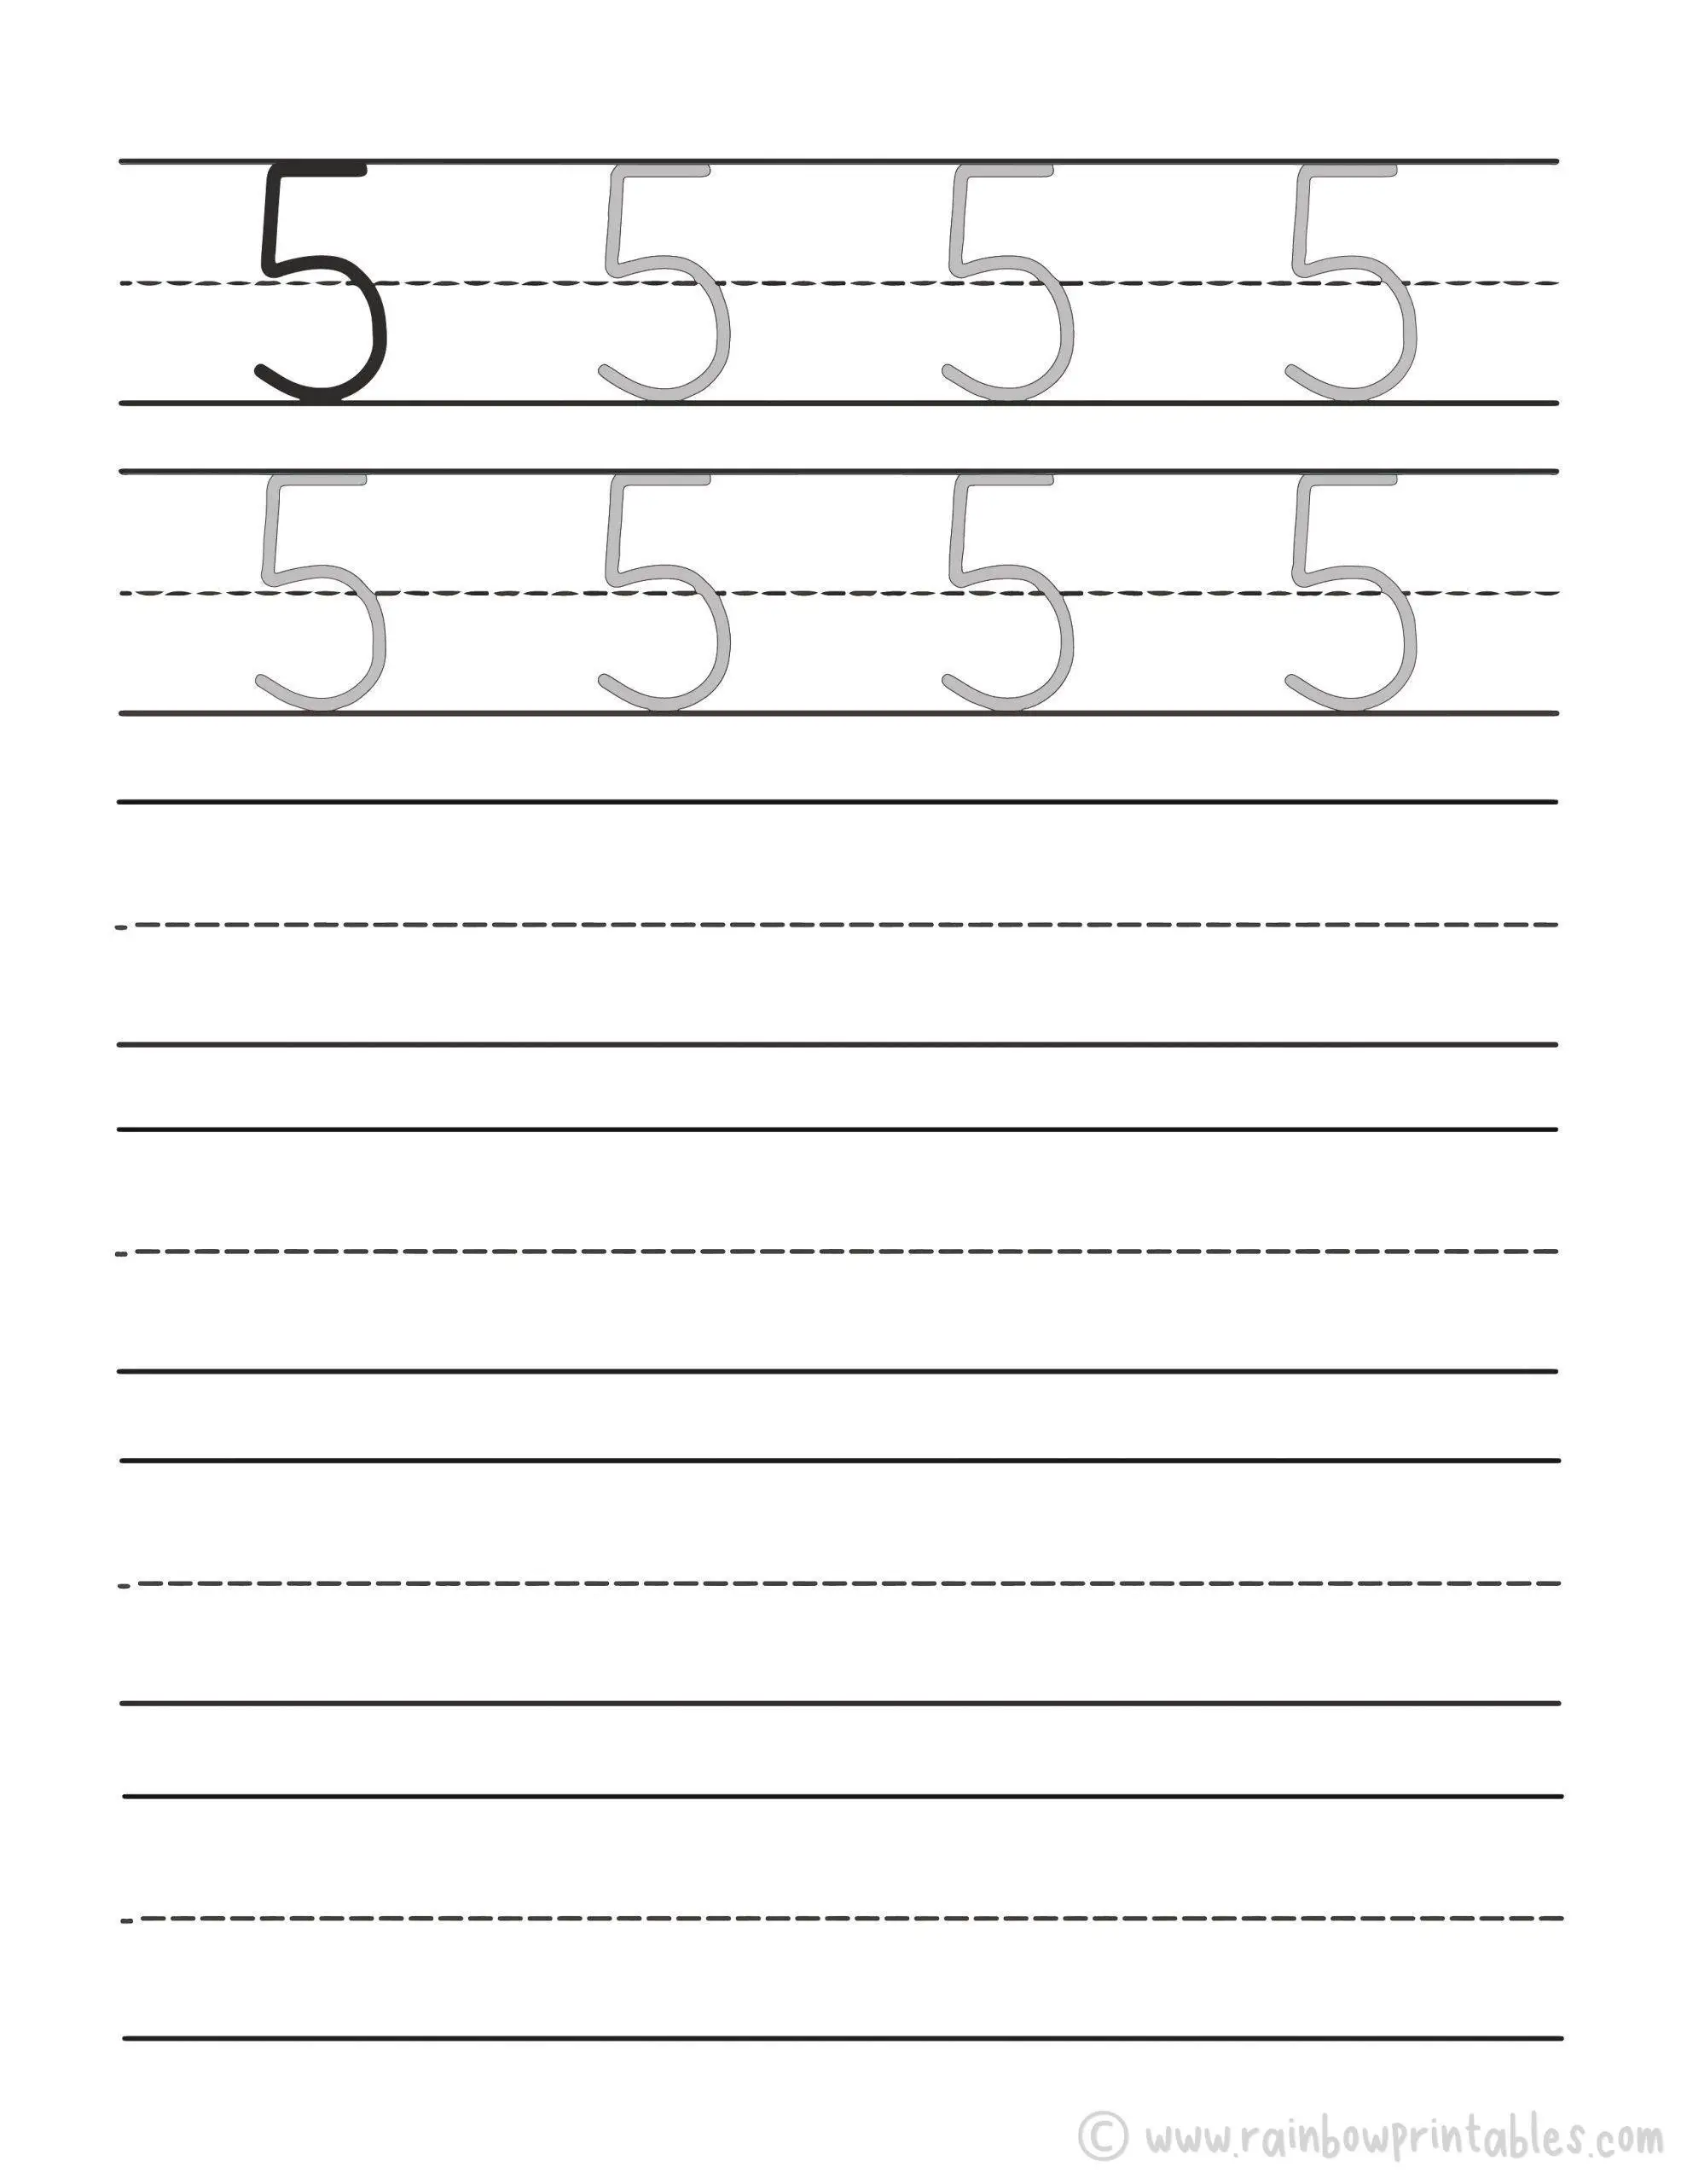 Trace Numbers Worksheet-05-FIVE